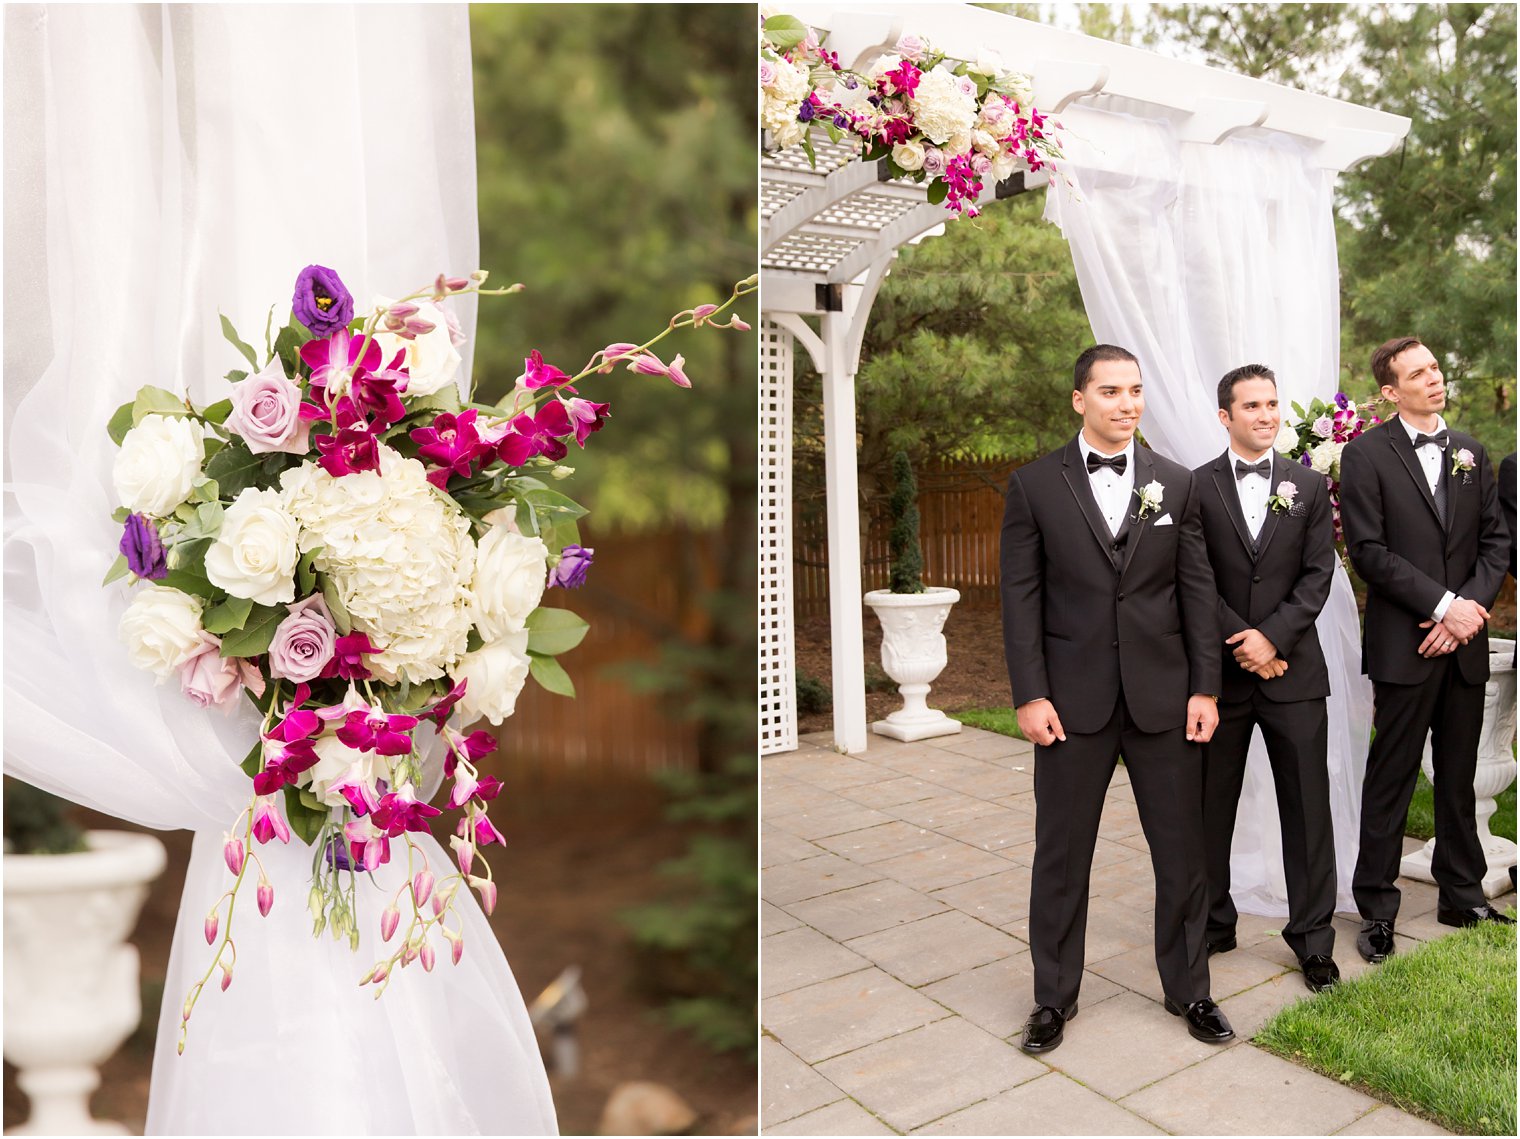 Groom seeing bride in recessional | Photos by Idalia Photography